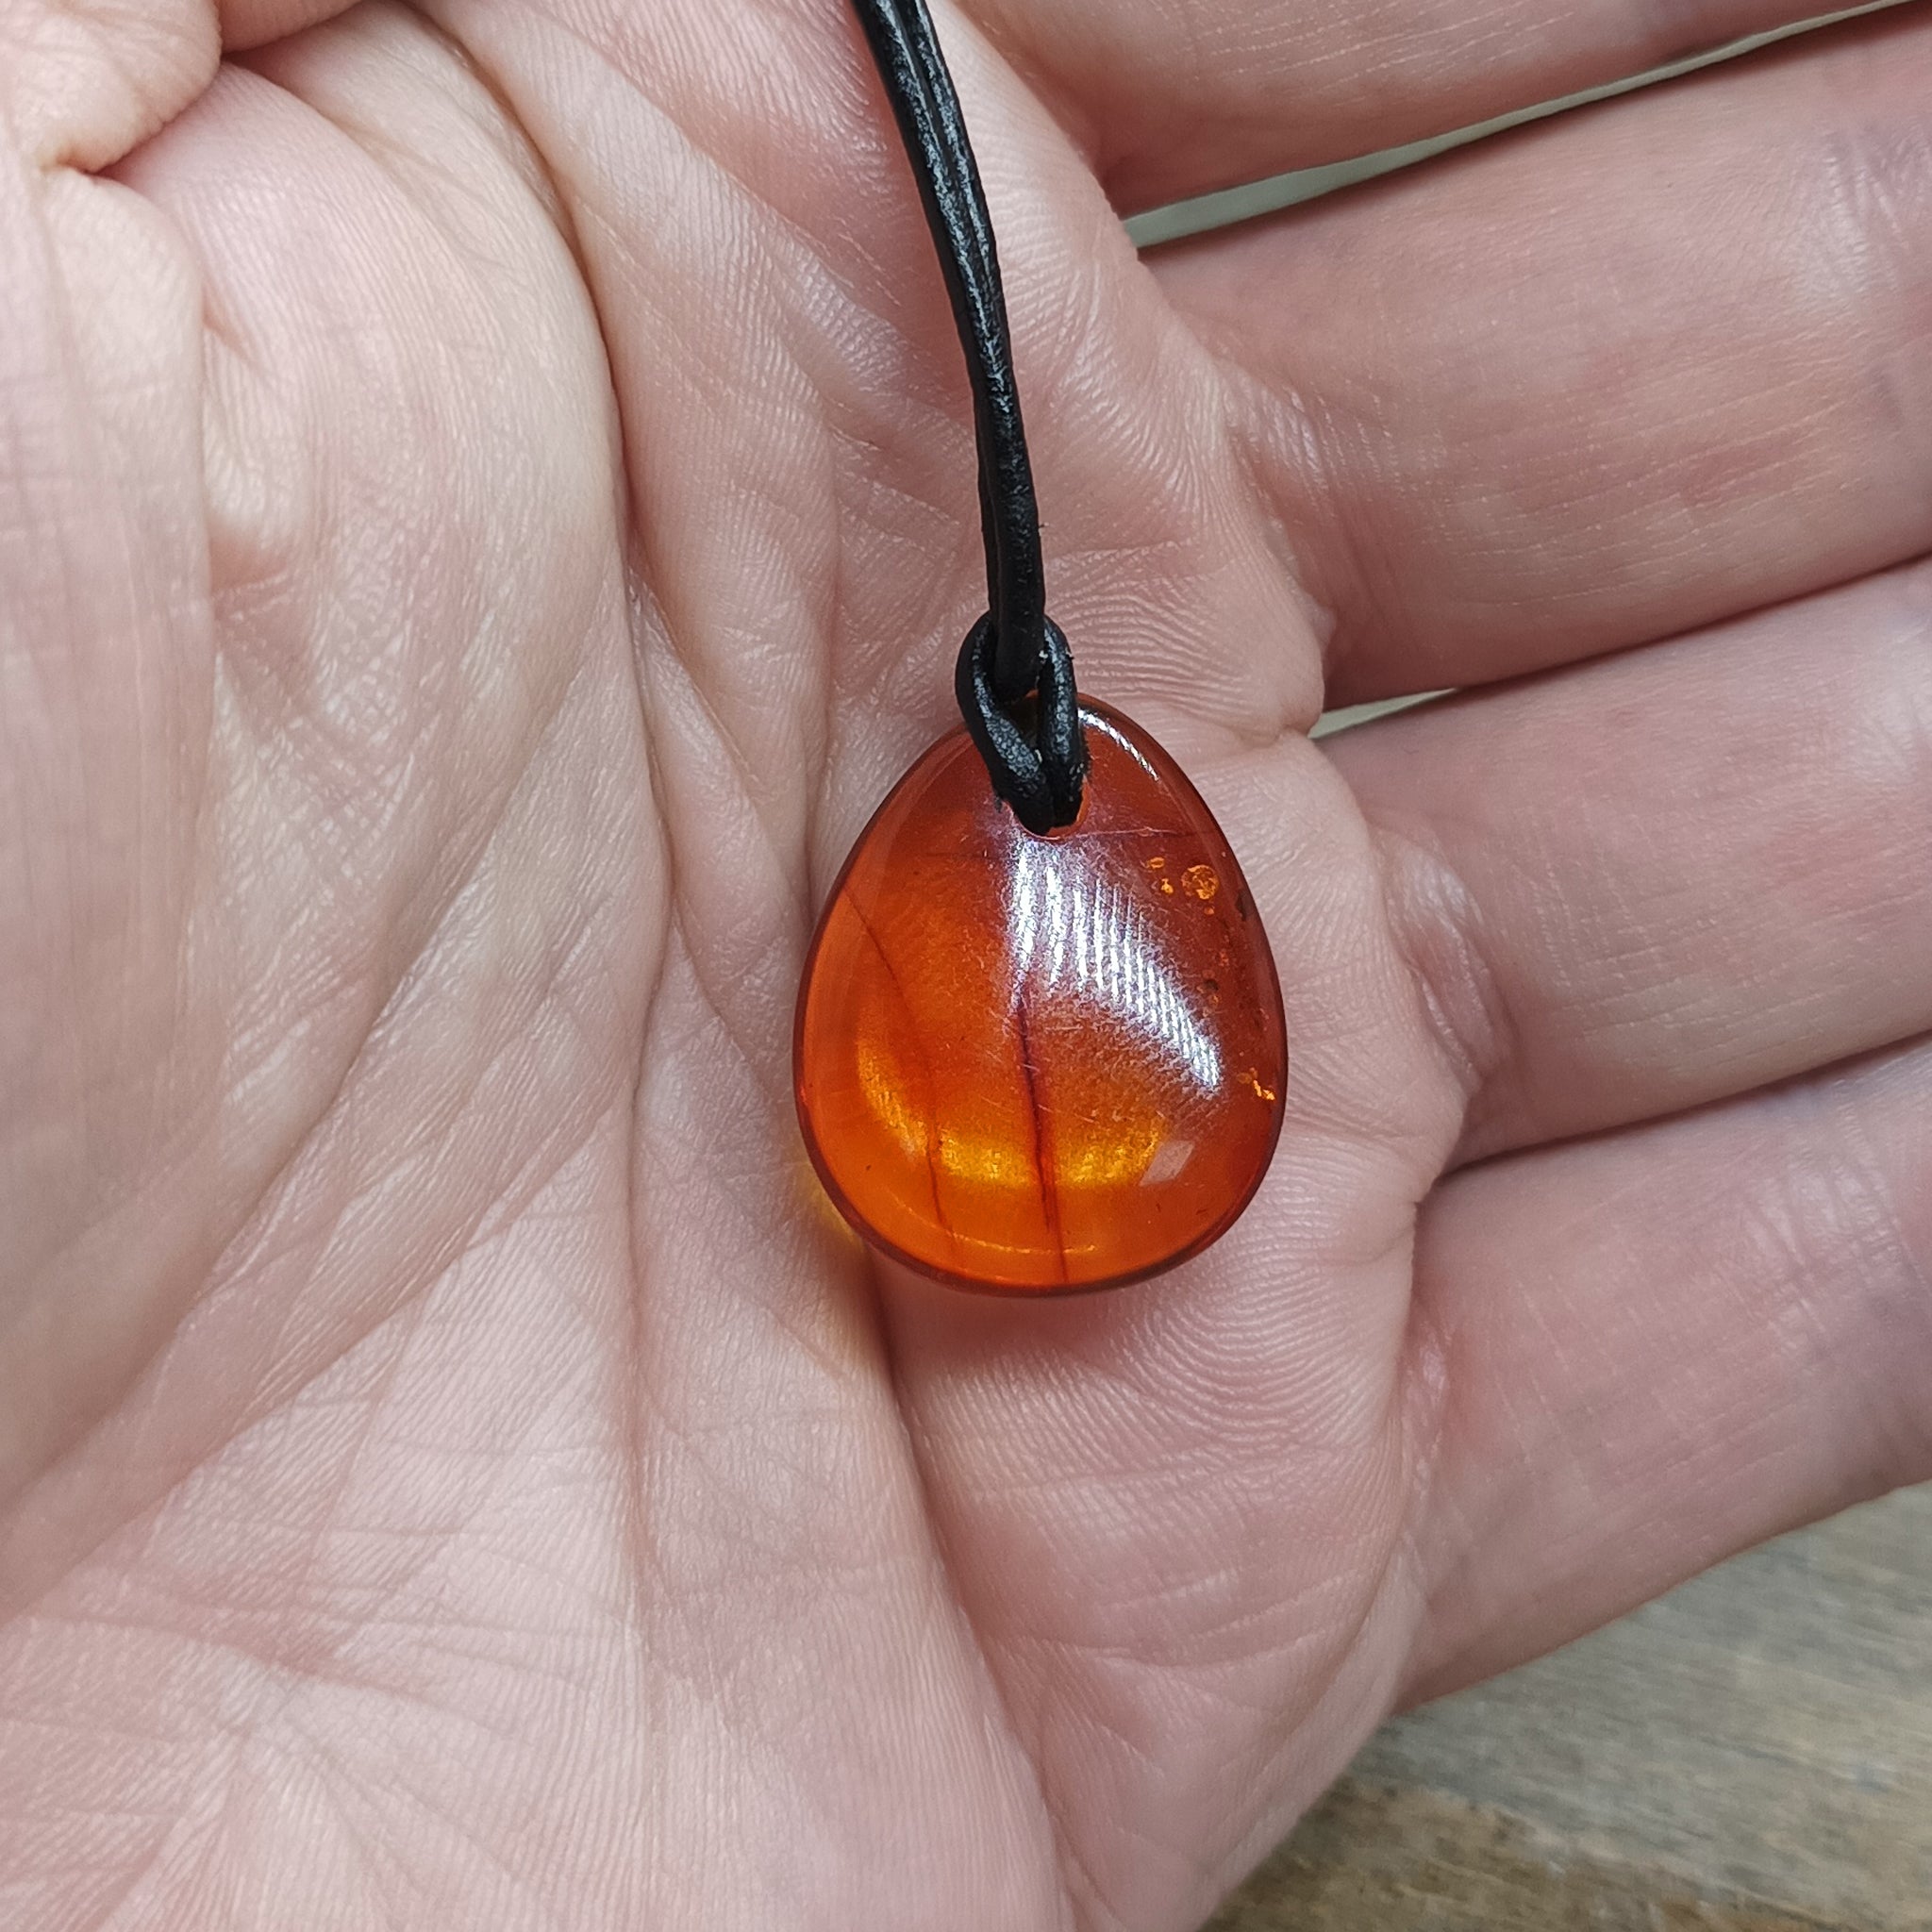 Amber Amulet Pendant on Hand with Leather Thong